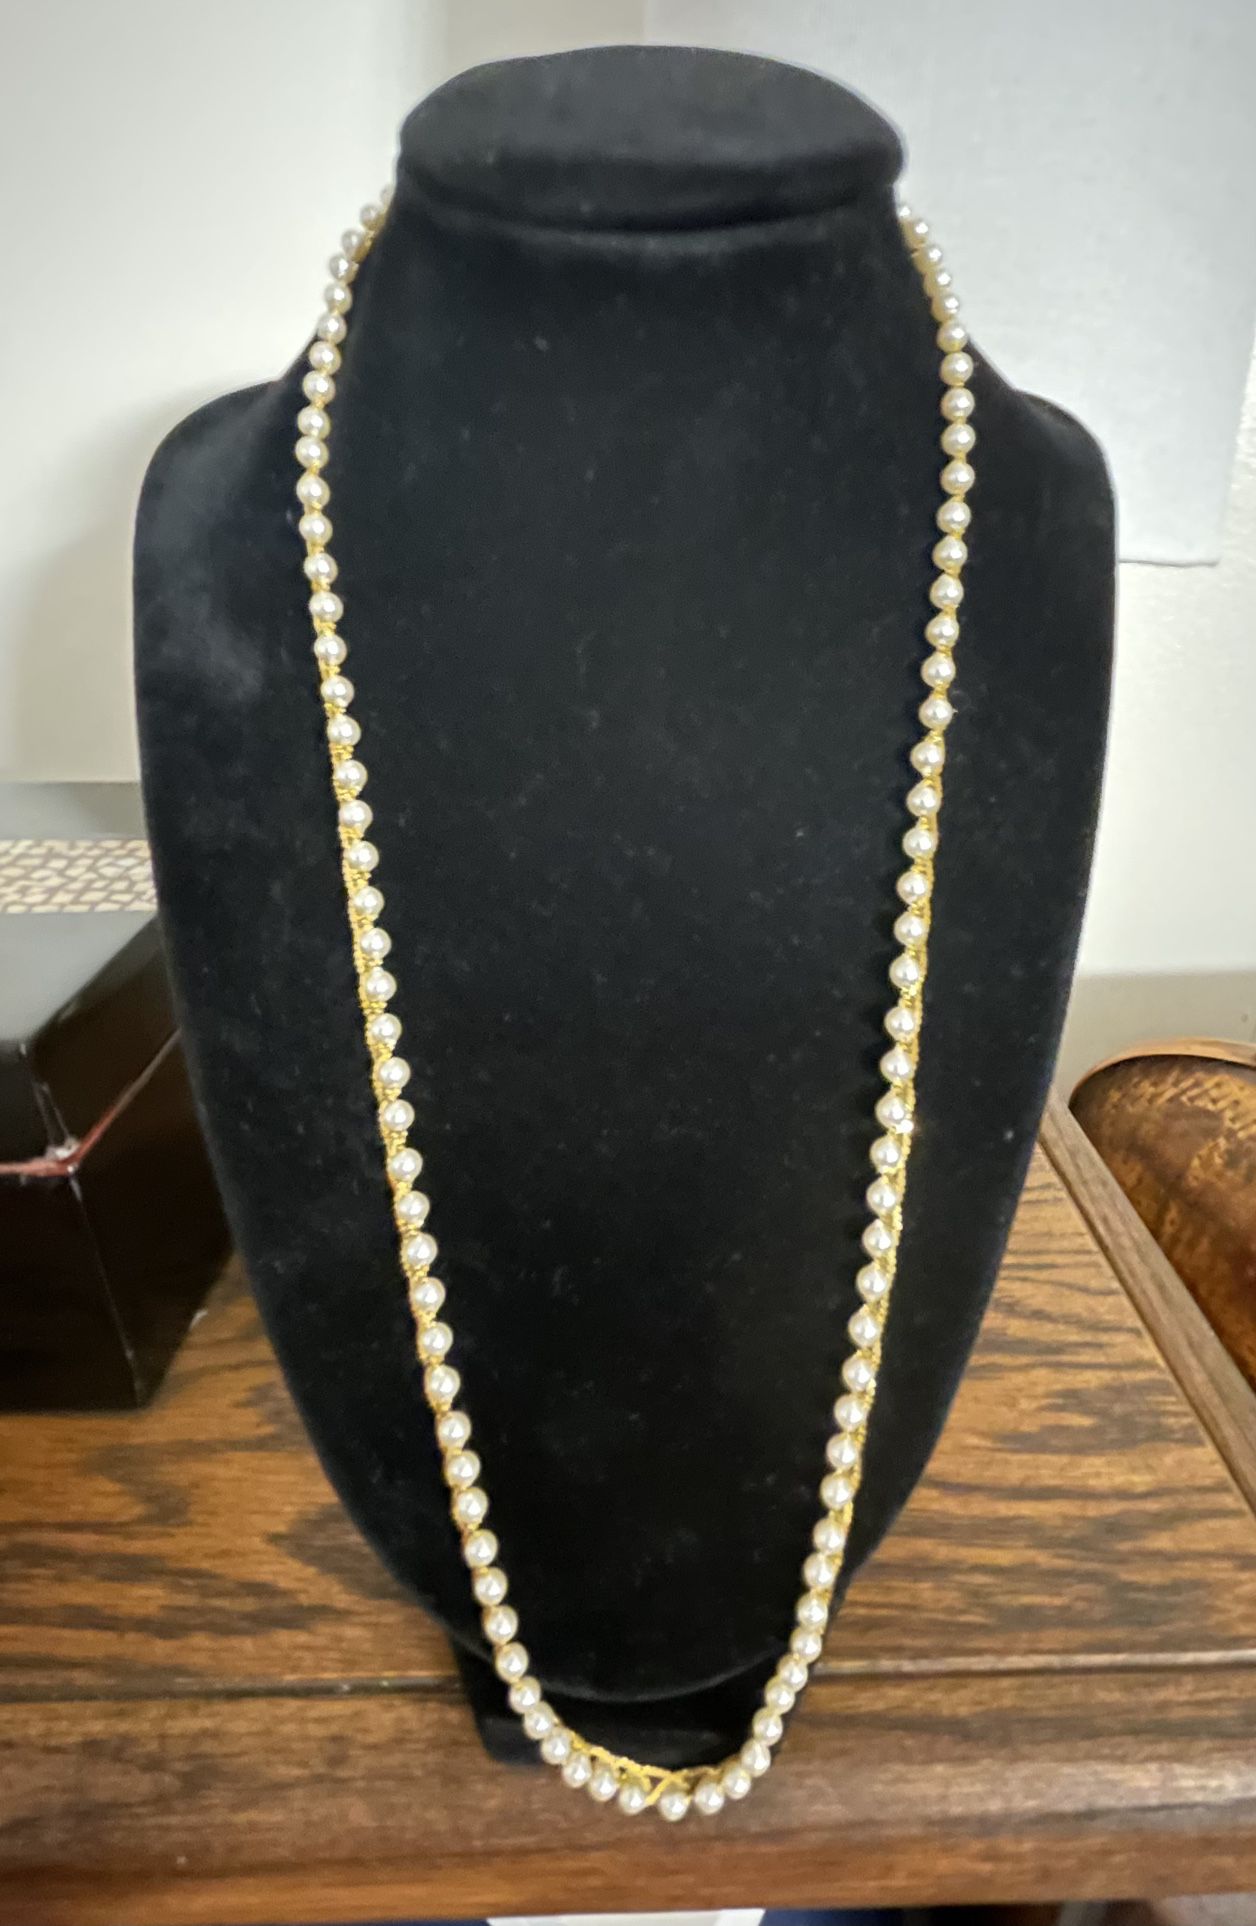 “Napier” Brand Fine Imitation Pearl Necklace With Gold Plated Chain 